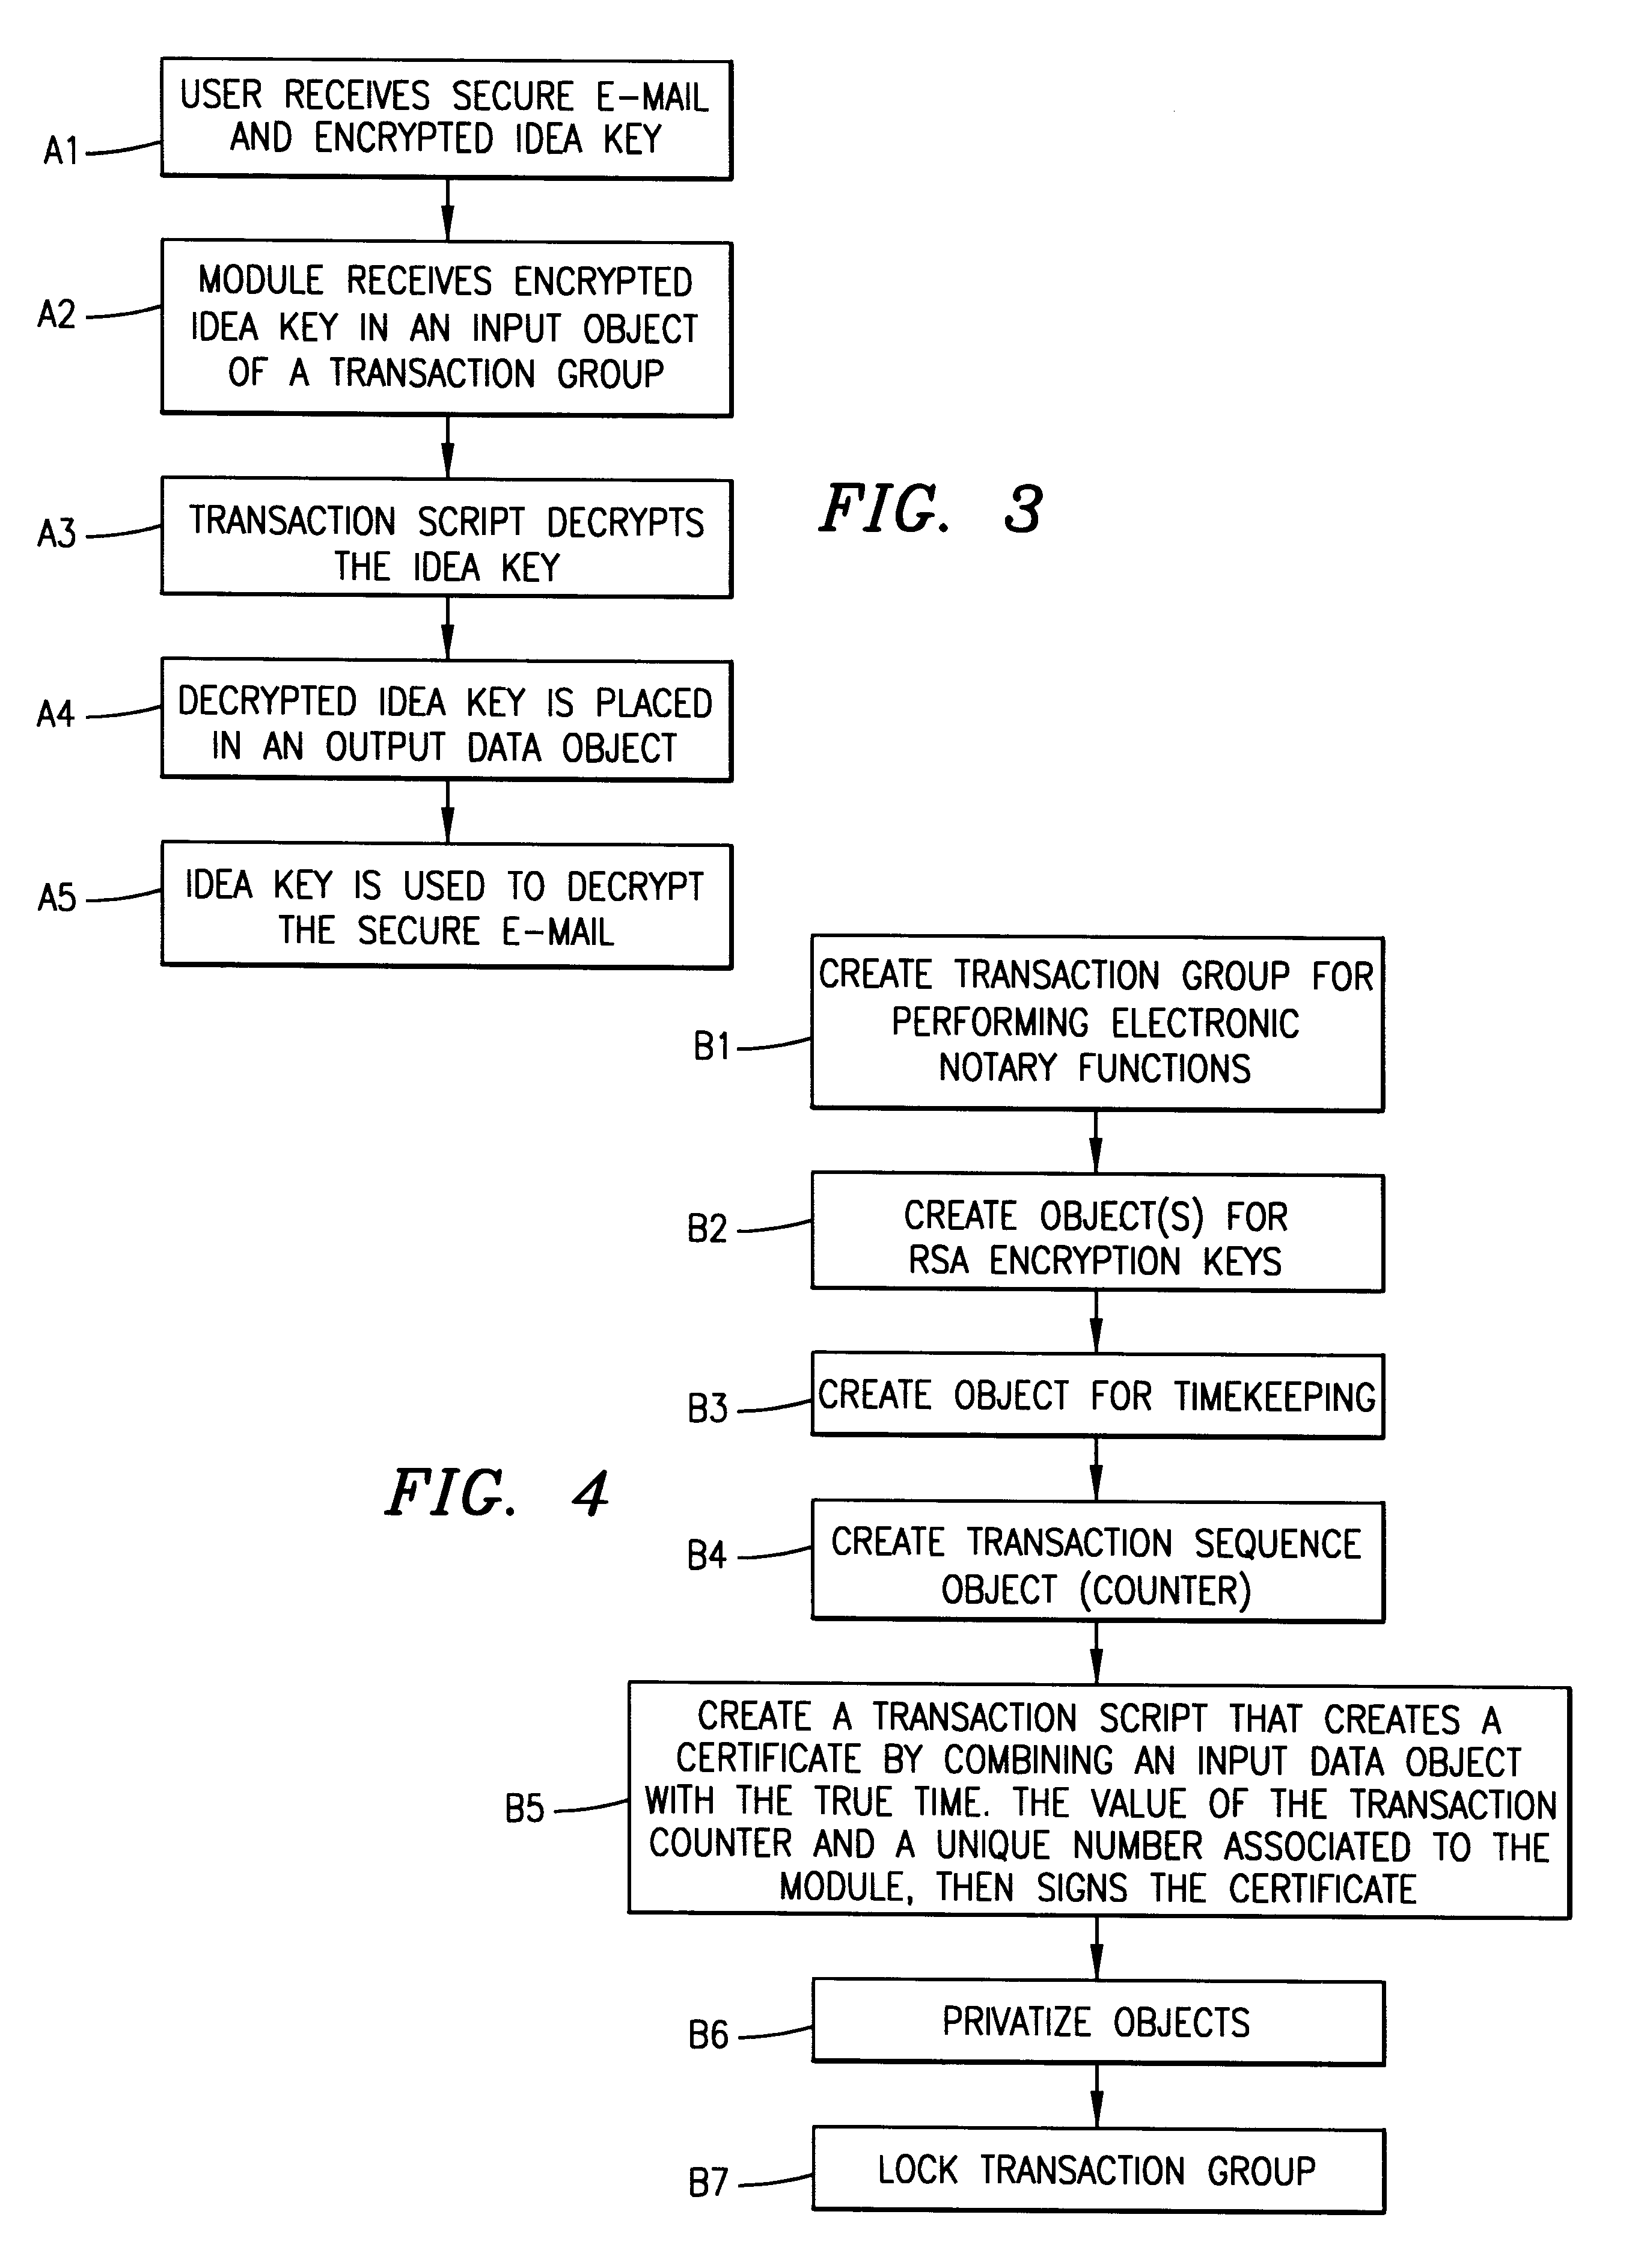 Apparatus for transfer of secure information between a data carrying module and an electronic device